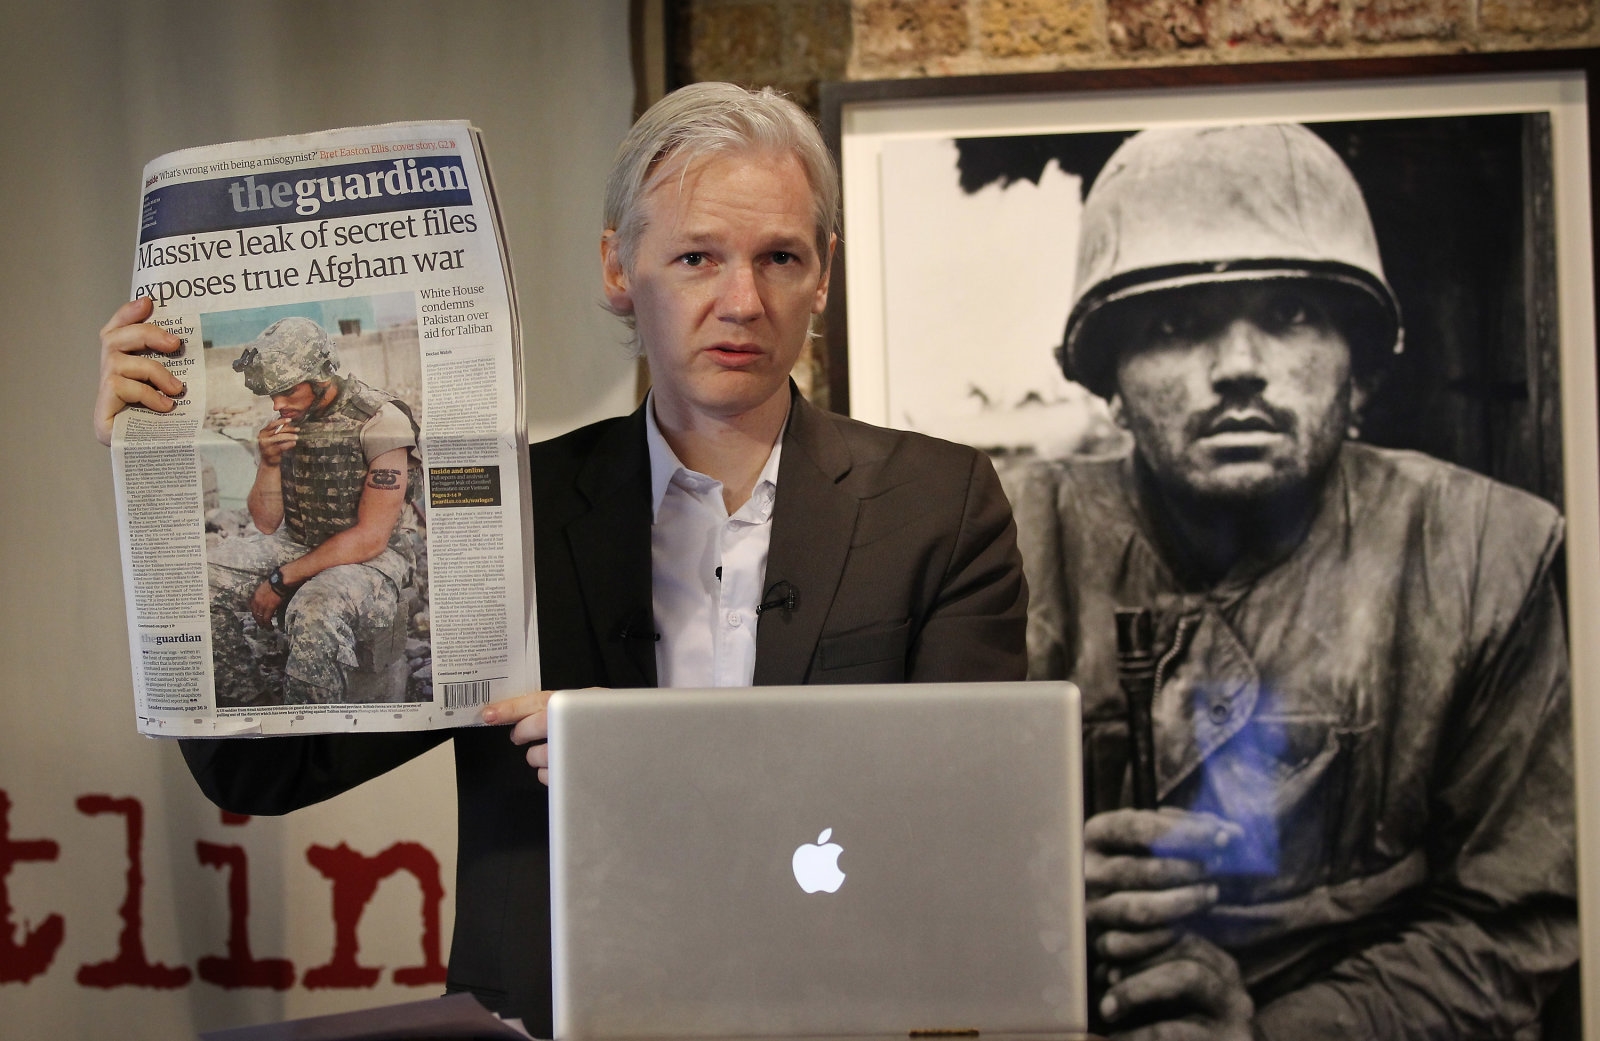 What legacy will WikiLeaks founder Julian Assange leave behind? | DeviceDaily.com